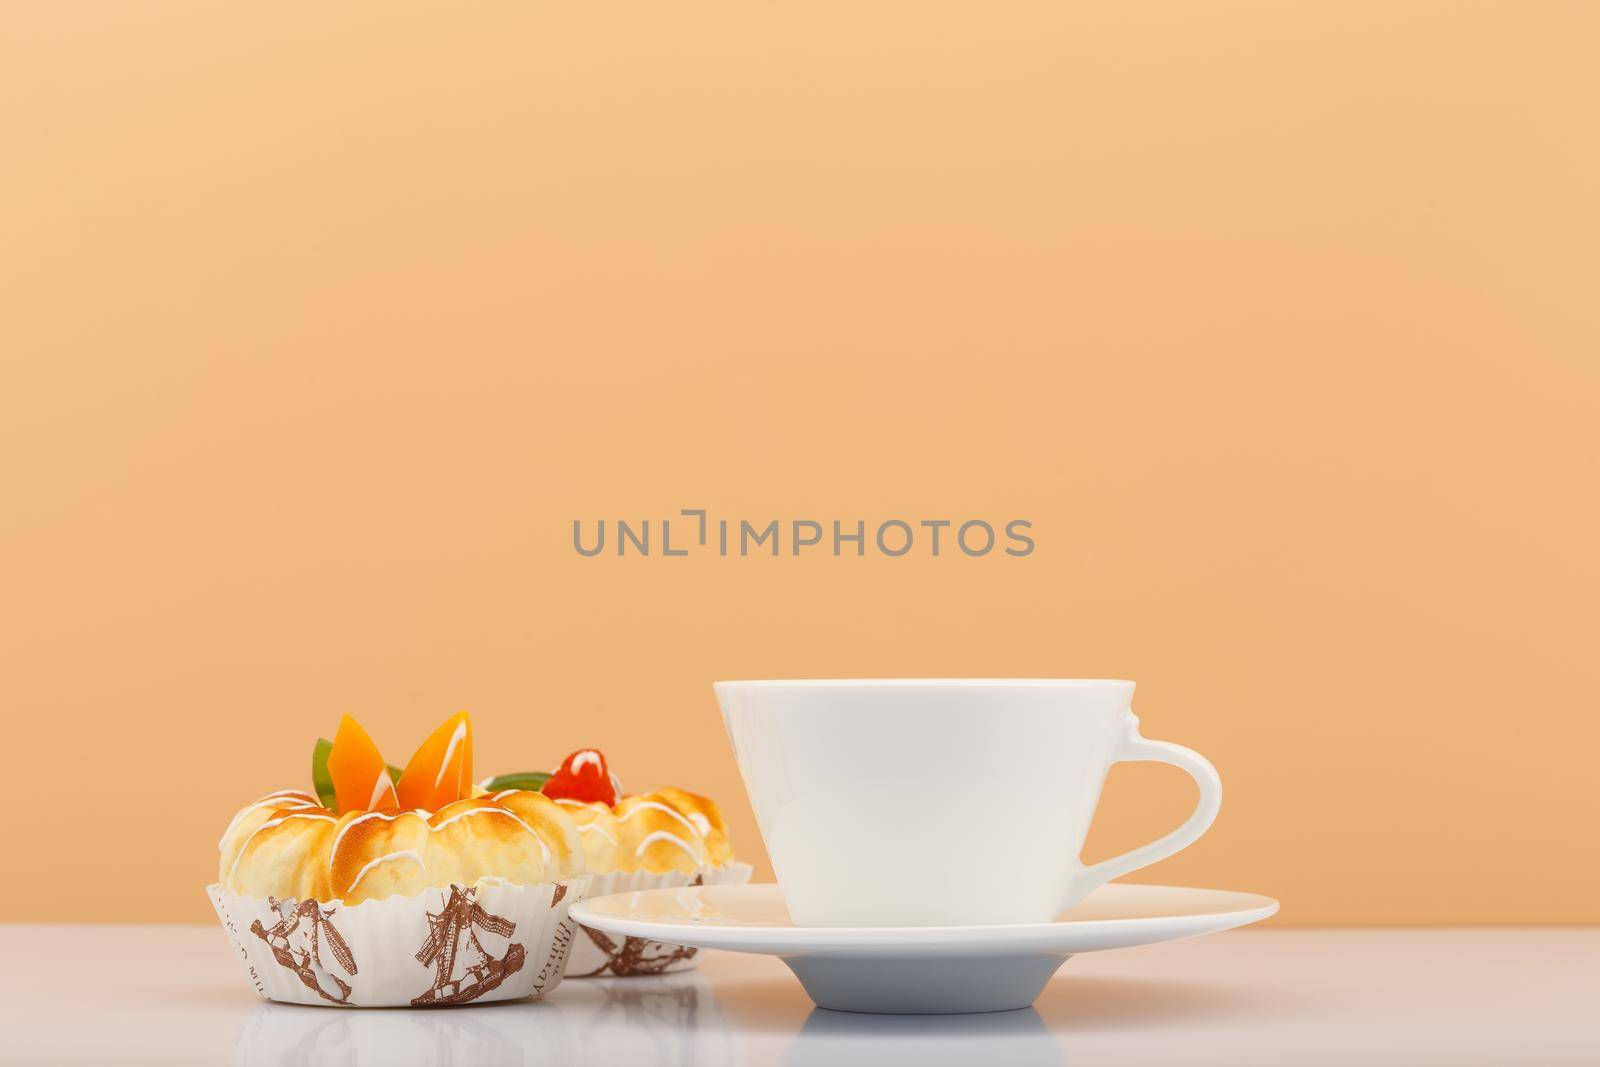 White ceramic tea or coffee cup with sweets next to it against beige background with copy space. High quality photo